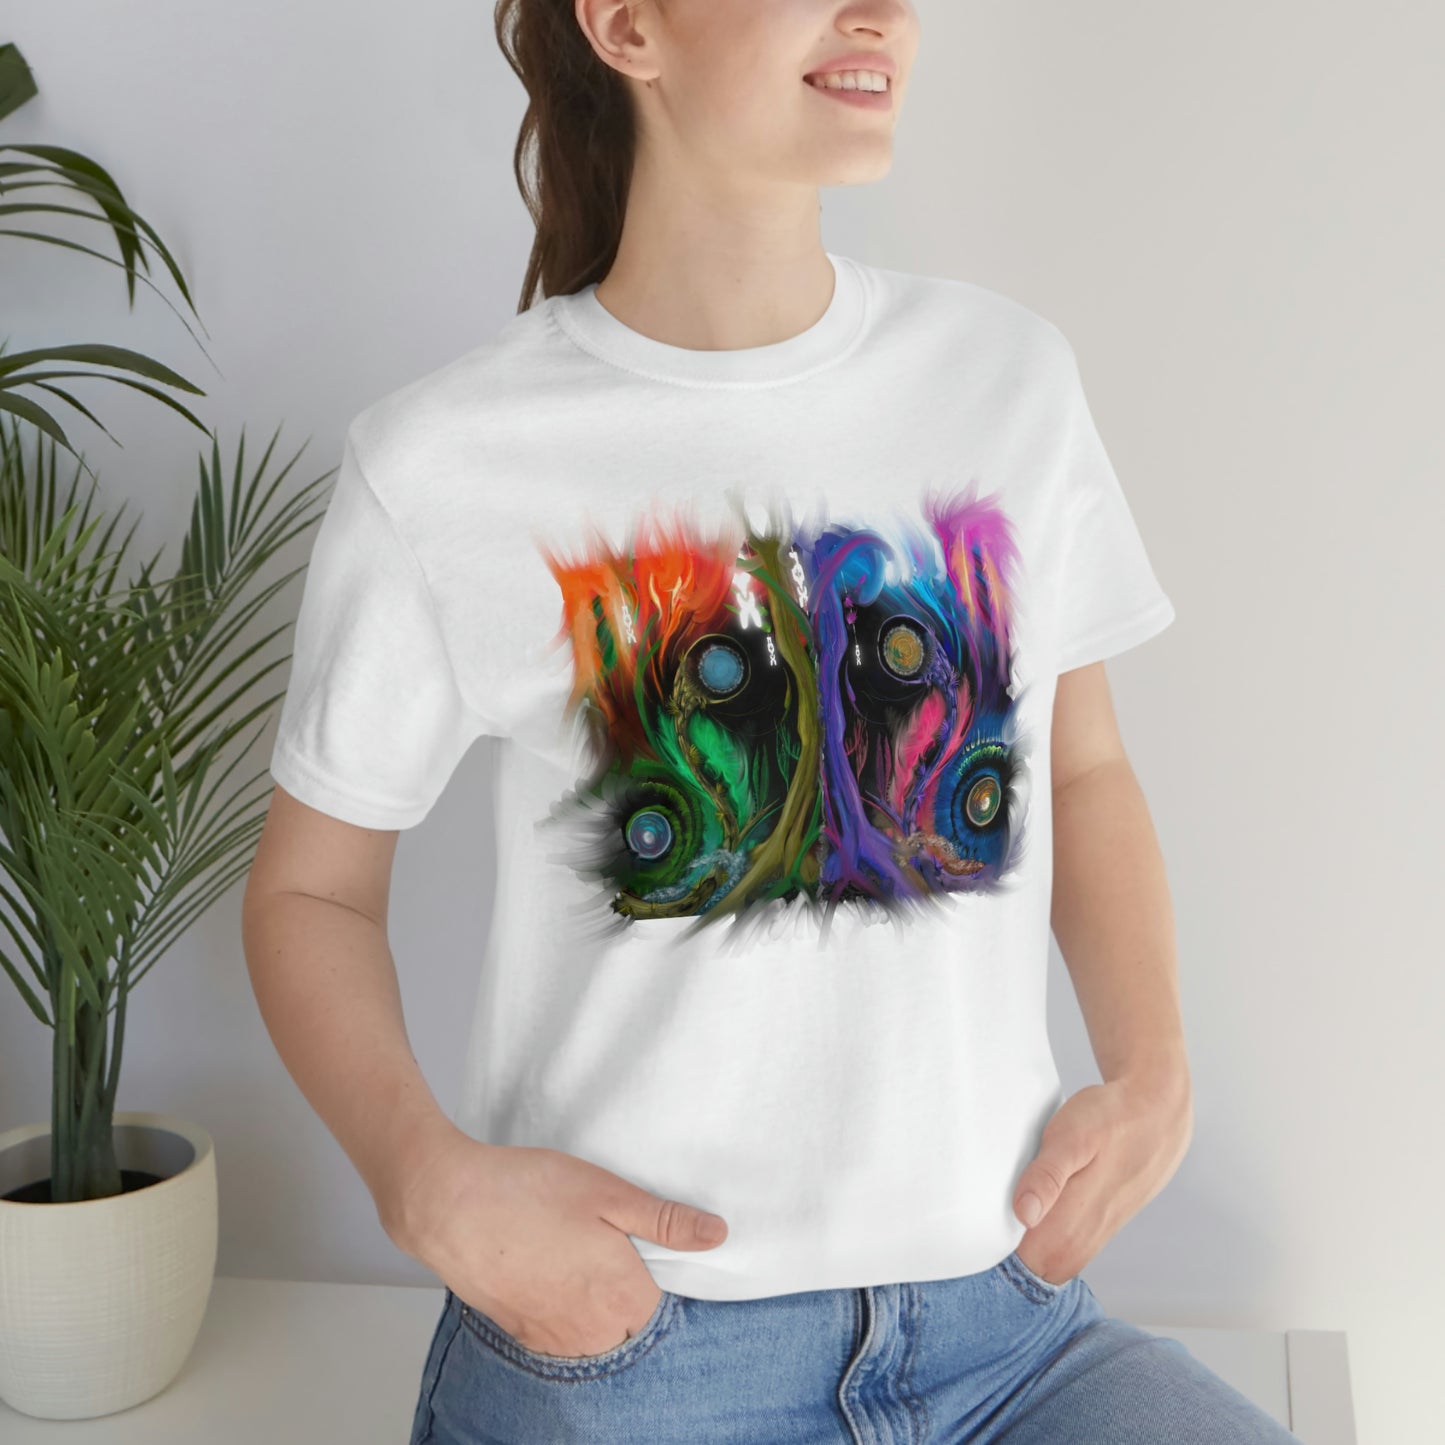 Deep In The Forest of Illusions Unisex Short Sleeve Tee